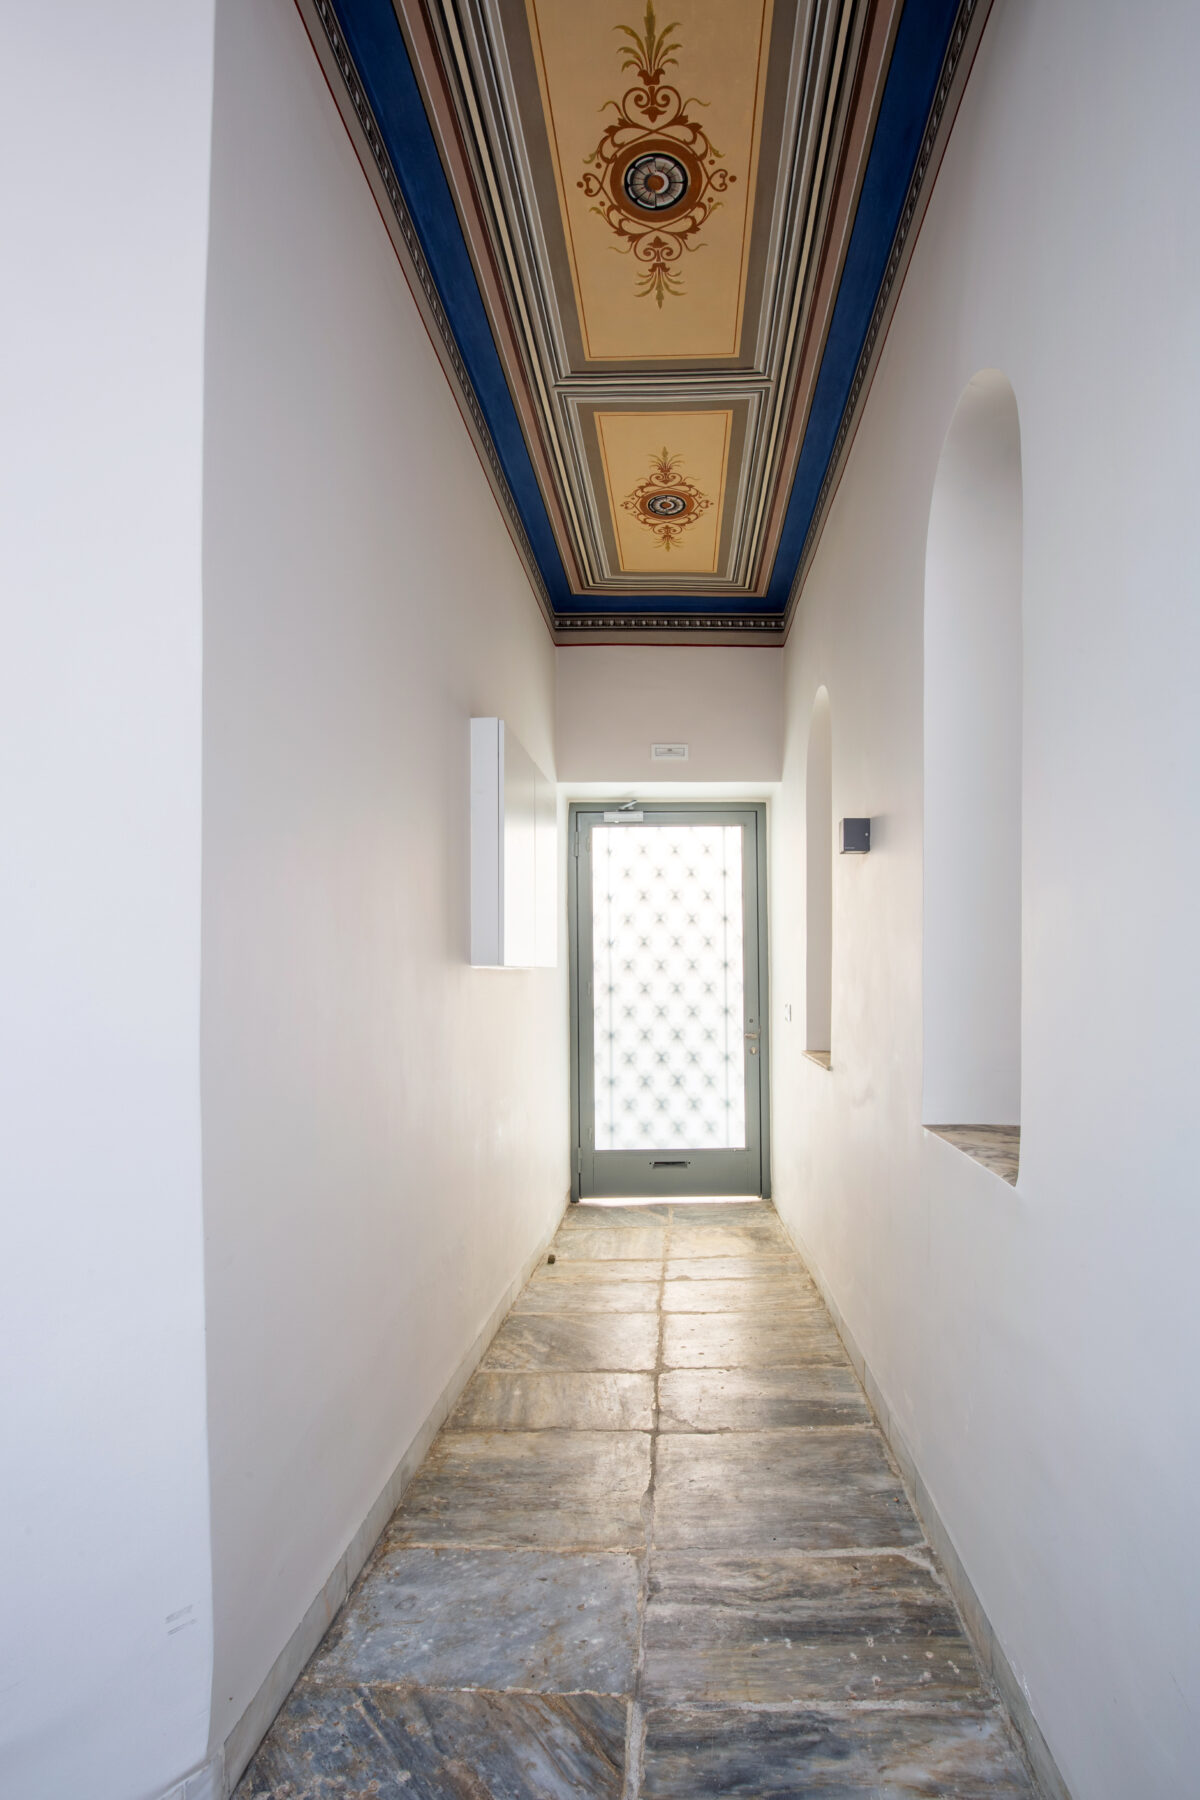 Archisearch Architect Anthi Oikonomou completed the revival of a two-storey listed building in Plaka, Athens